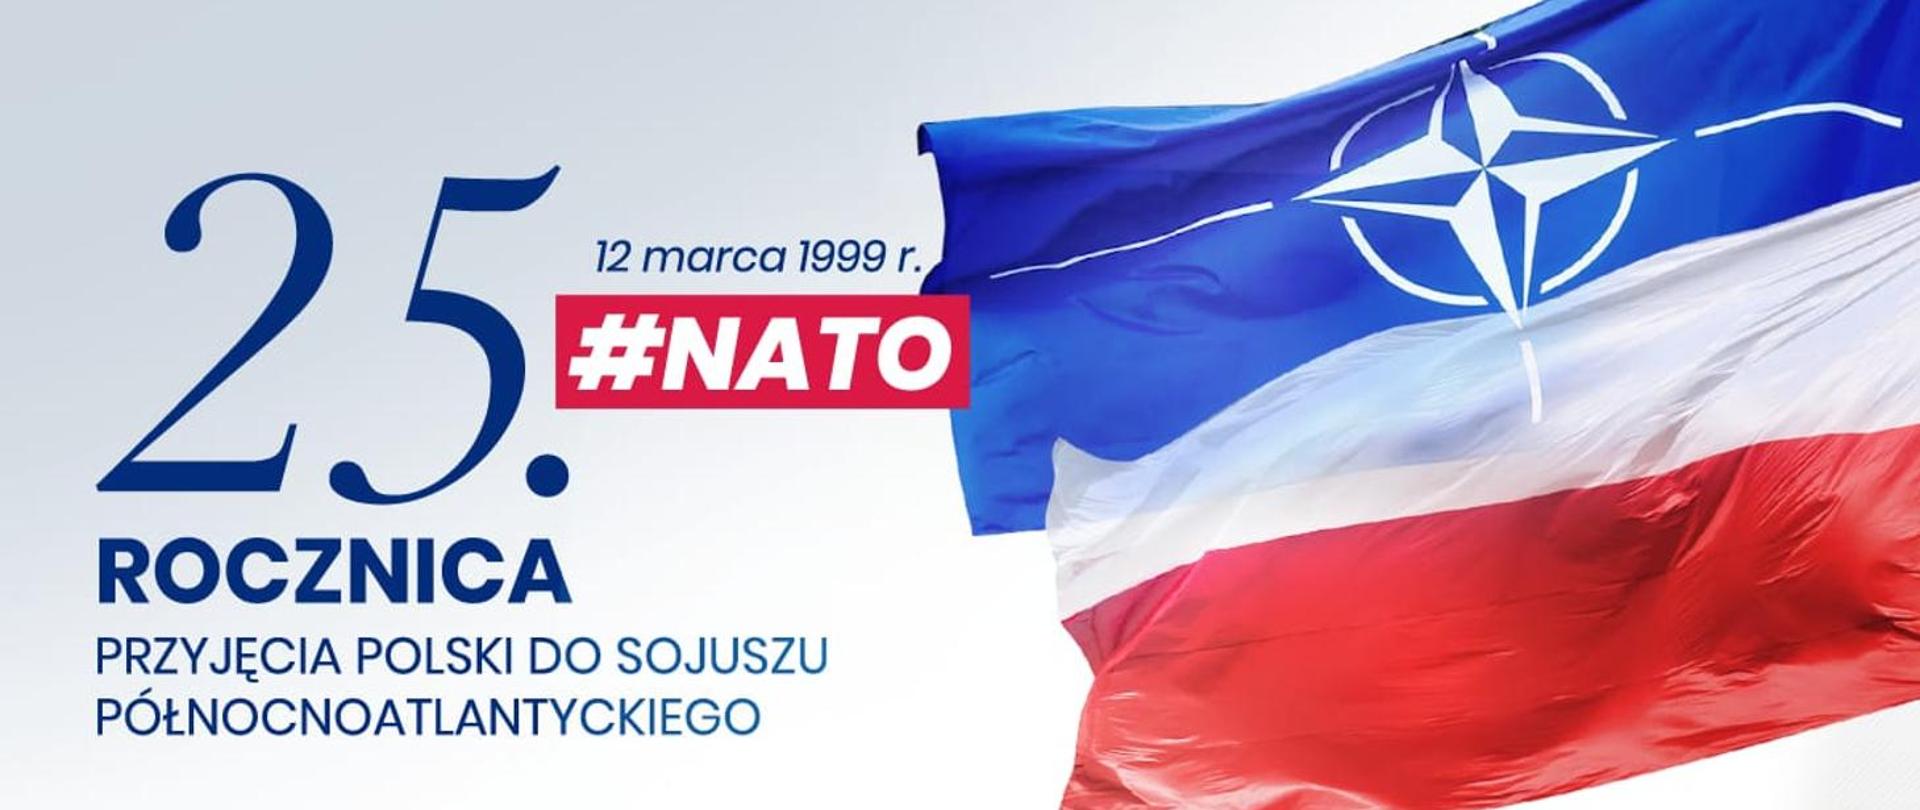 25 years ago, Poland joined NATO - The Chancellery of the Prime Minister -  Gov.pl website